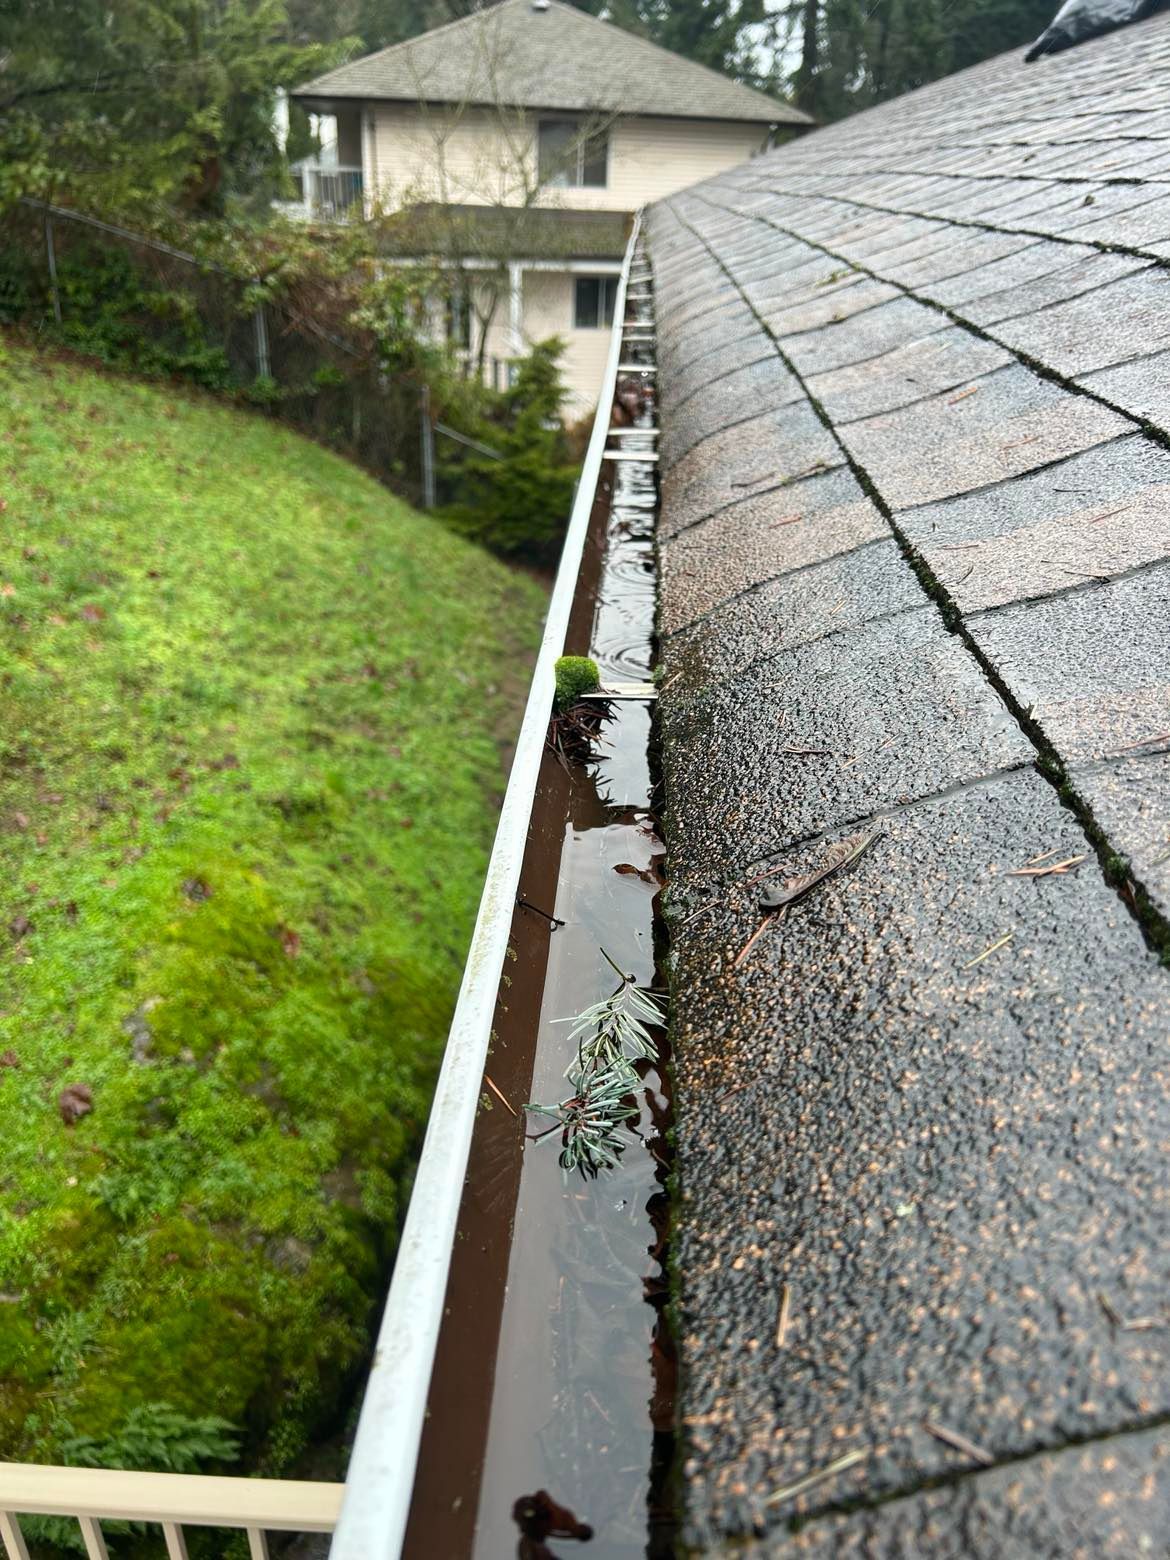 Photo of gutter cleaned and repaired in langford, brown inside